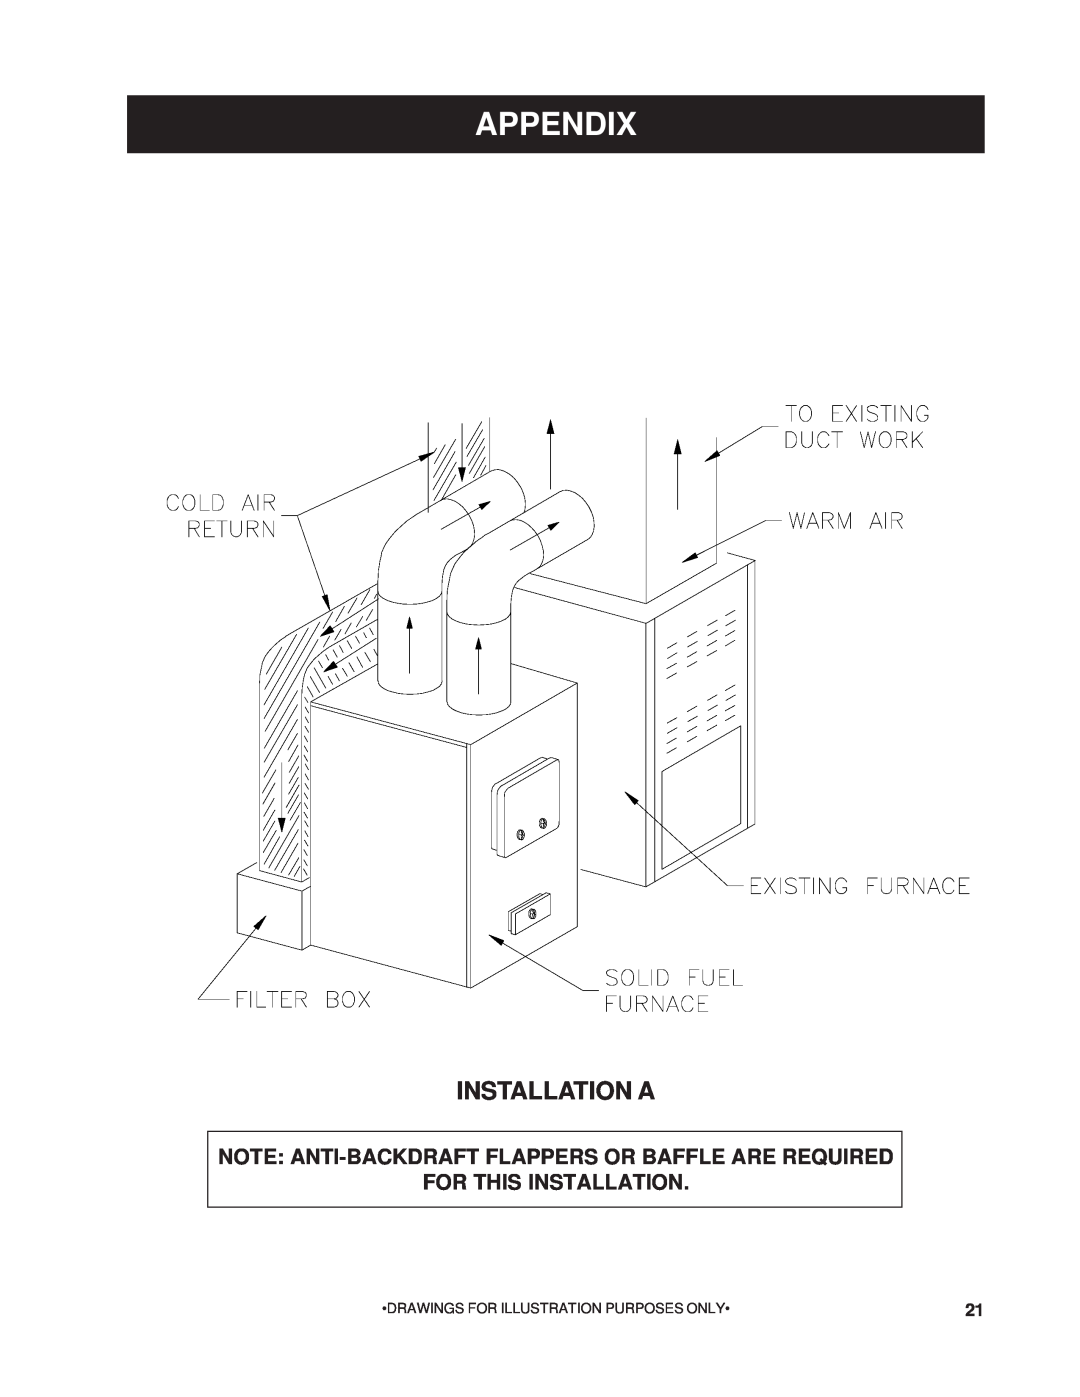 United States Stove 1200Q Appendix, Installation A, For This Installation, •Drawings For Illustration Purposes Only• 